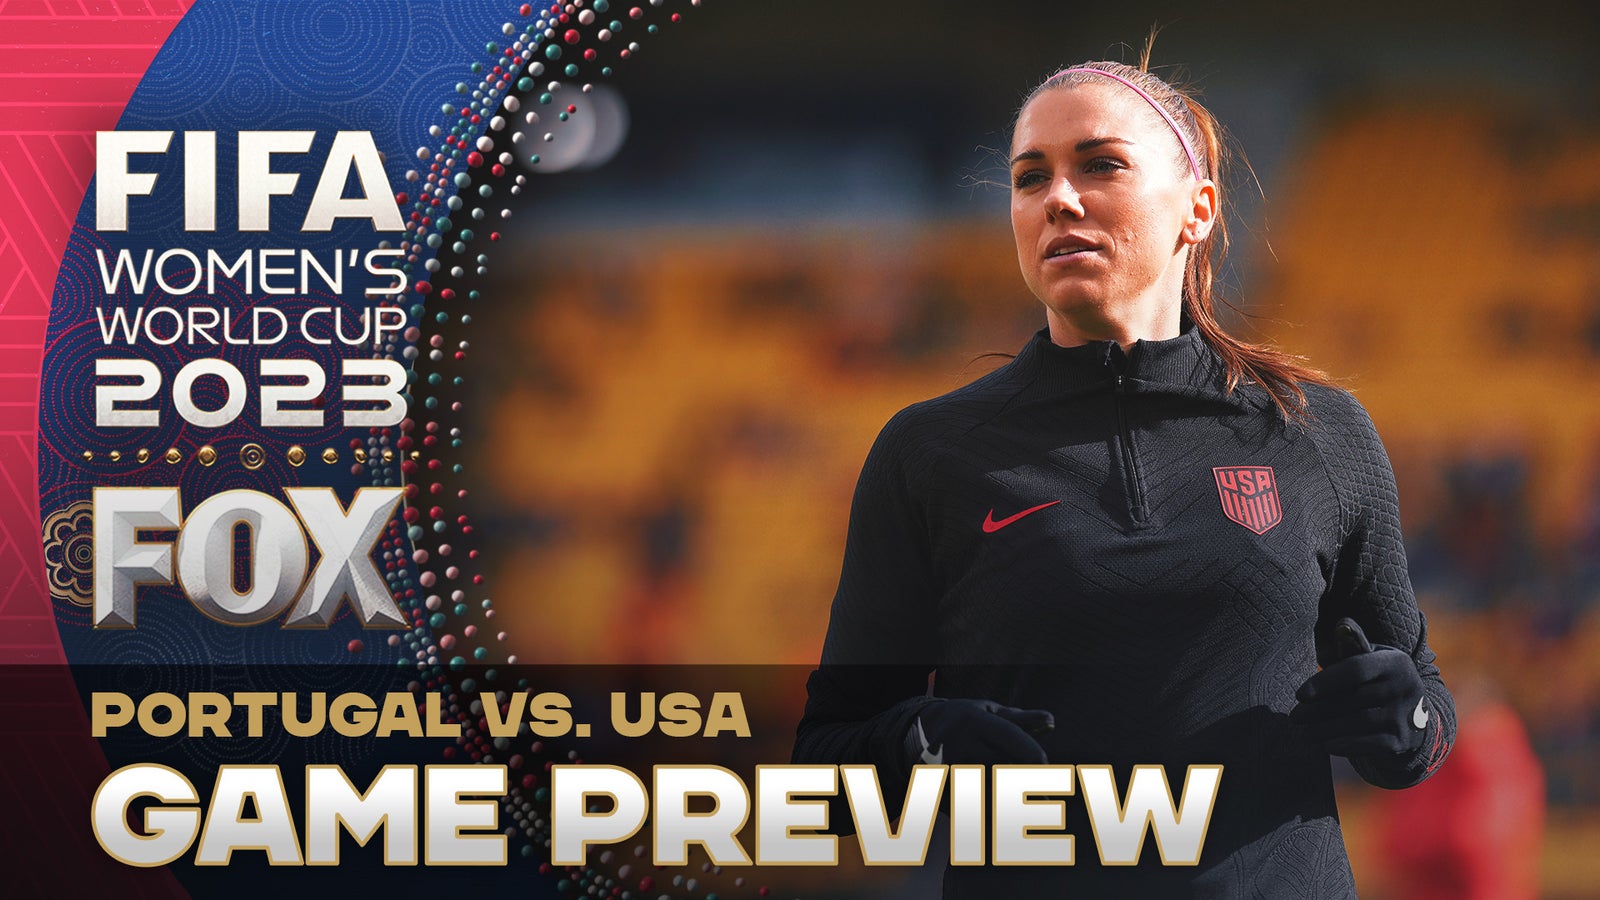 "This is a must win" — Carli Lloyd and Alexi Lalas discuss adjustments the USWNT needs to make vs. Portugal